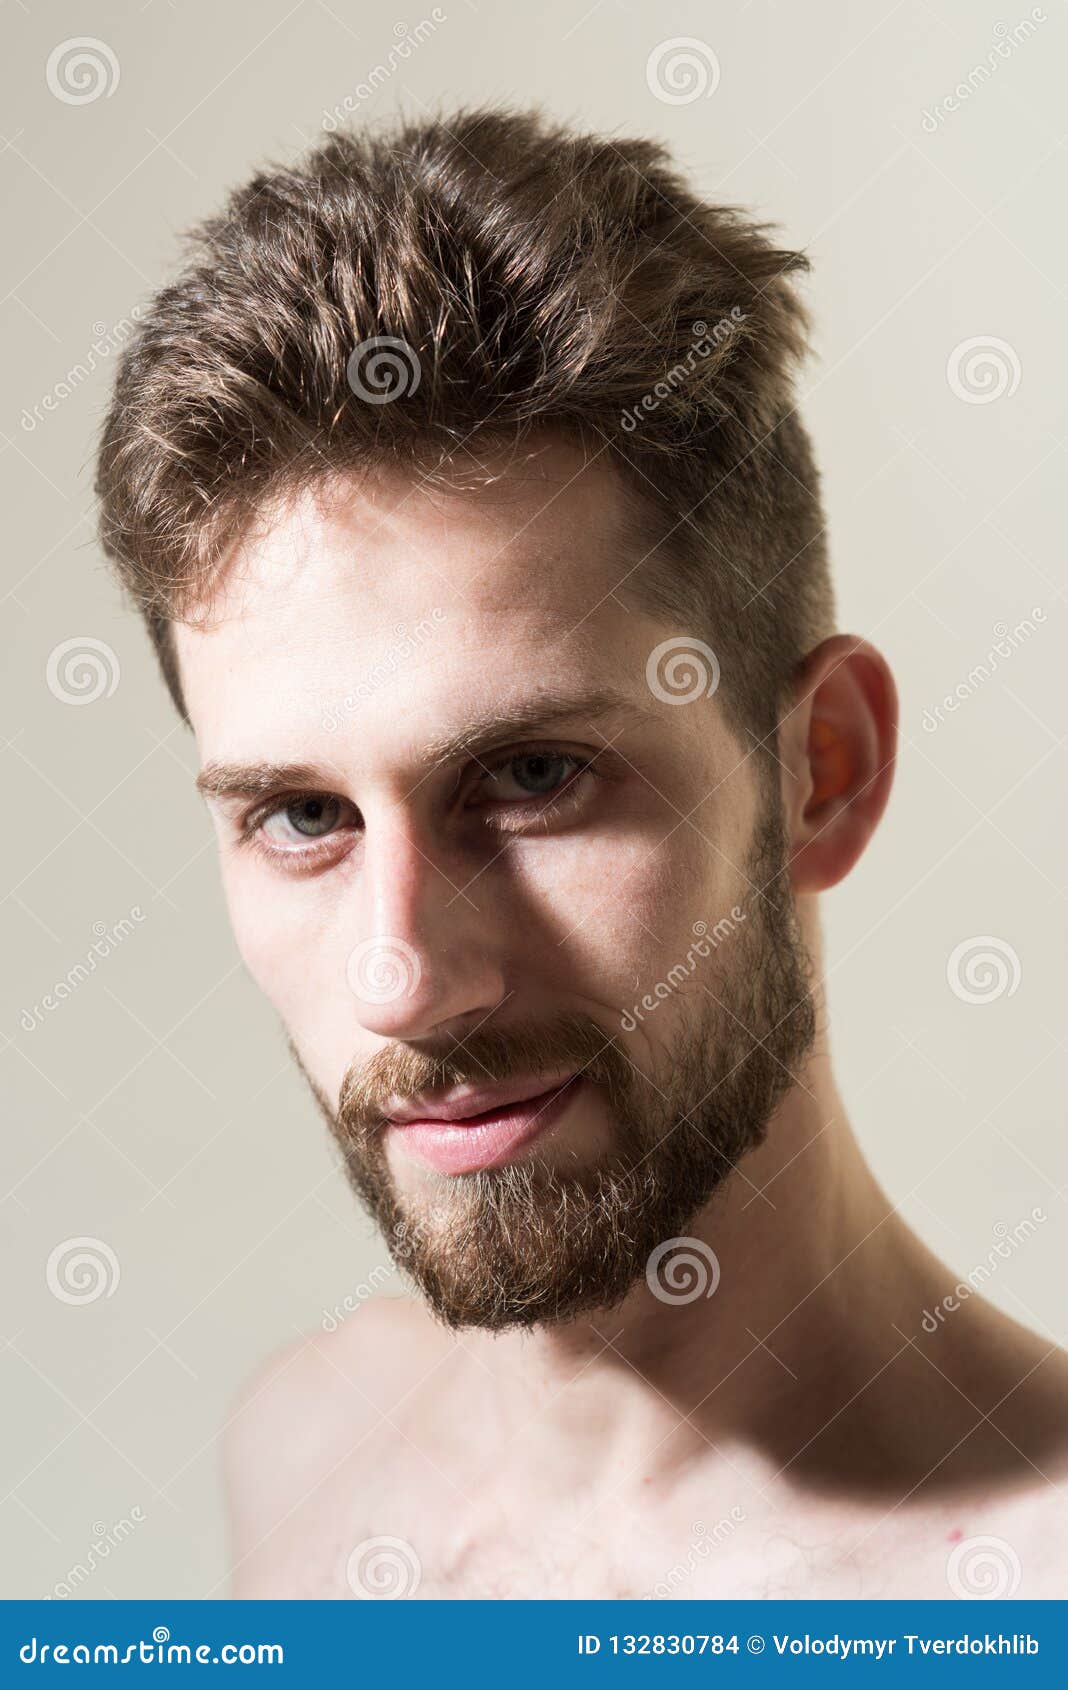 The Beard Style To Suit Both His Face and His Personality. Mens Hair  Grooming. Barber Shop Stock Photo - Image of skincare, morning: 132830784